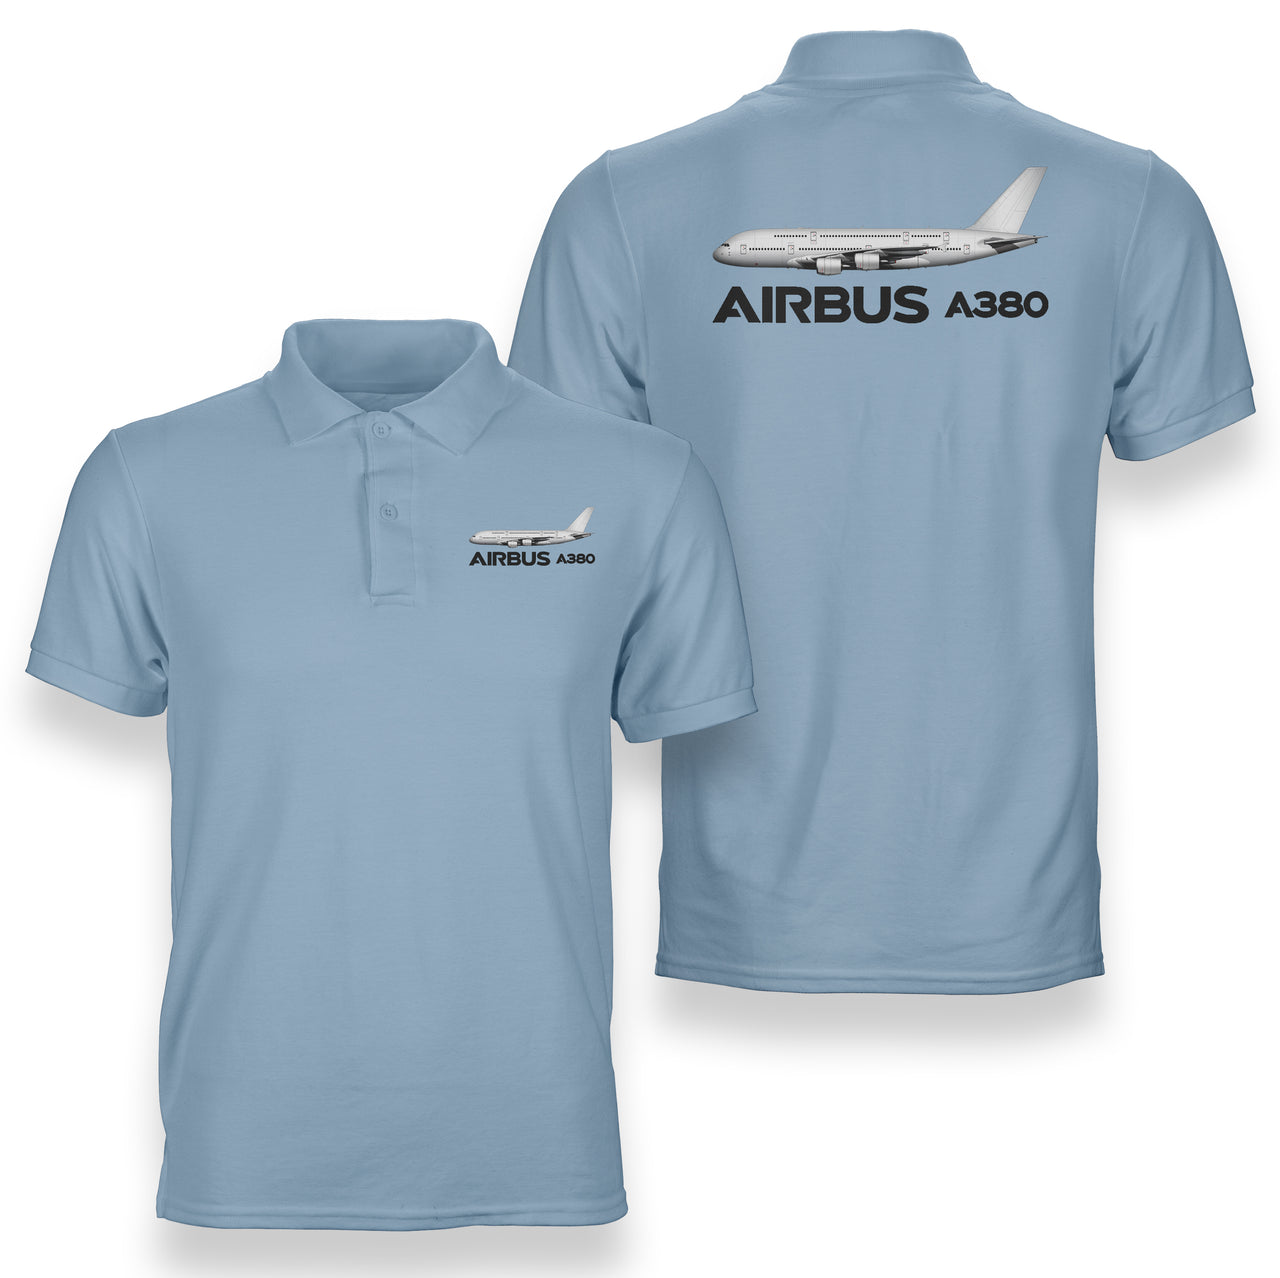 The Airbus A380 Designed Double Side Polo T-Shirts